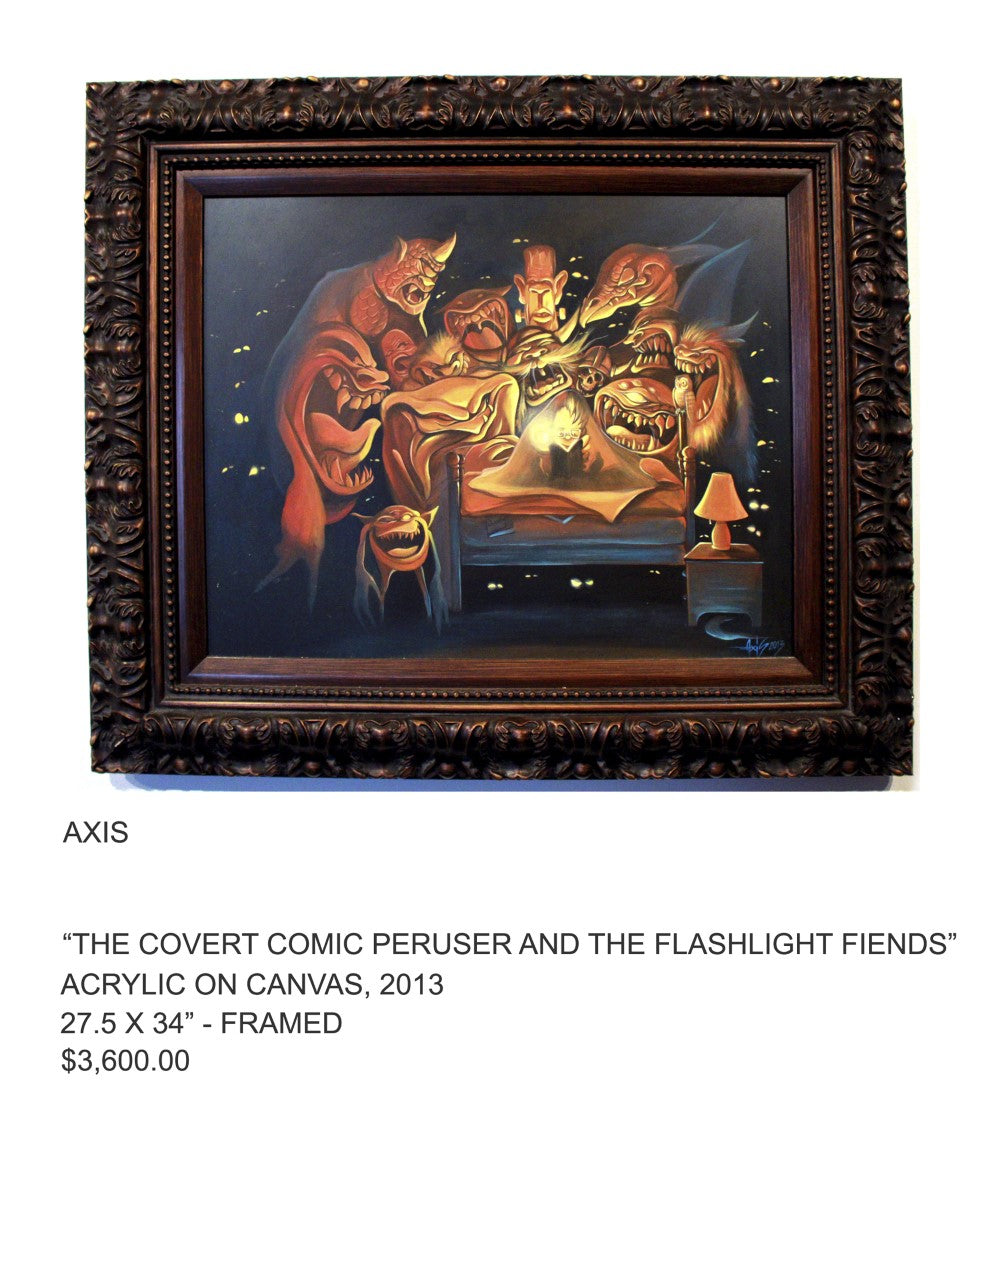 The covert comic peruser and the flashlight friends